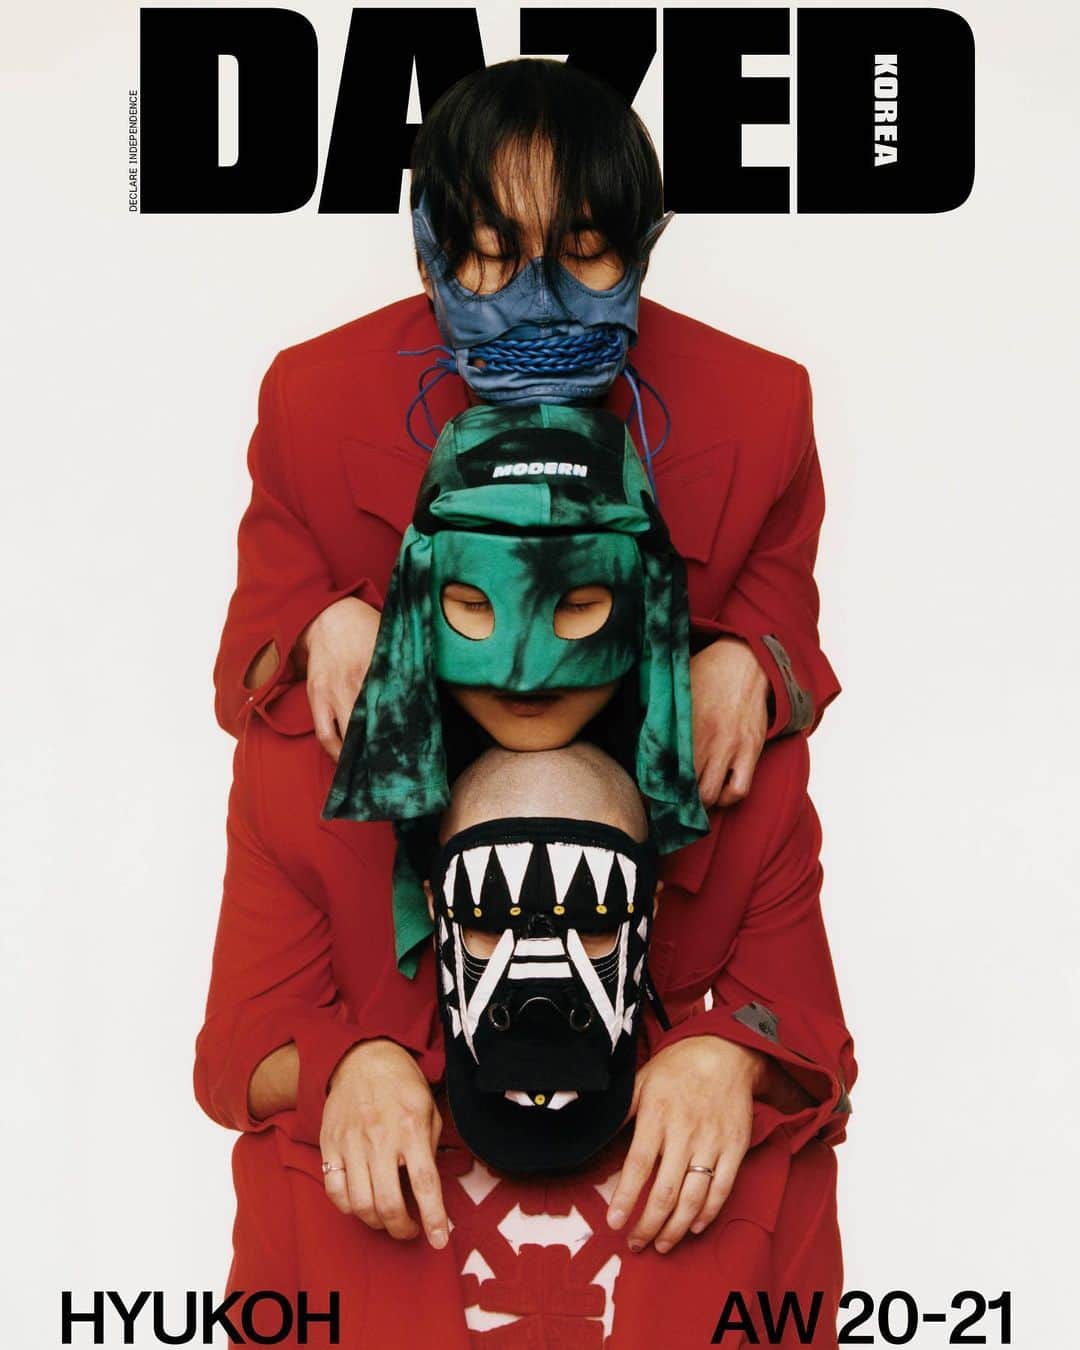 Oh Hyukのインスタグラム：「New cover for @dazedkorea One and only suits for @hyukohofficial from @virgilabloh @off____white new masks from @synmurayama  ❤️❤️❤️❤️❤️❤️❤️❤️❤️❤️🦾❤️🦾🦾  혁오가 데이즈드 코리아 가을 에디션의 표지를 장식했습니다.  Off-White 의 버질 아블로가 혁오를 위해 디자인한 수트와 신무라야마의 마스크를 착용했습니다.   Visual Direction @yeyoungkim9 Editor @oh.yura Photography @chogiseok Text @yi_hyunjun Art Direction With Projects @withprojects Hair @gabe.sin Makeup @kangyoonjin_ Fashion Assistant @dl.duswl Assistant @oeita」